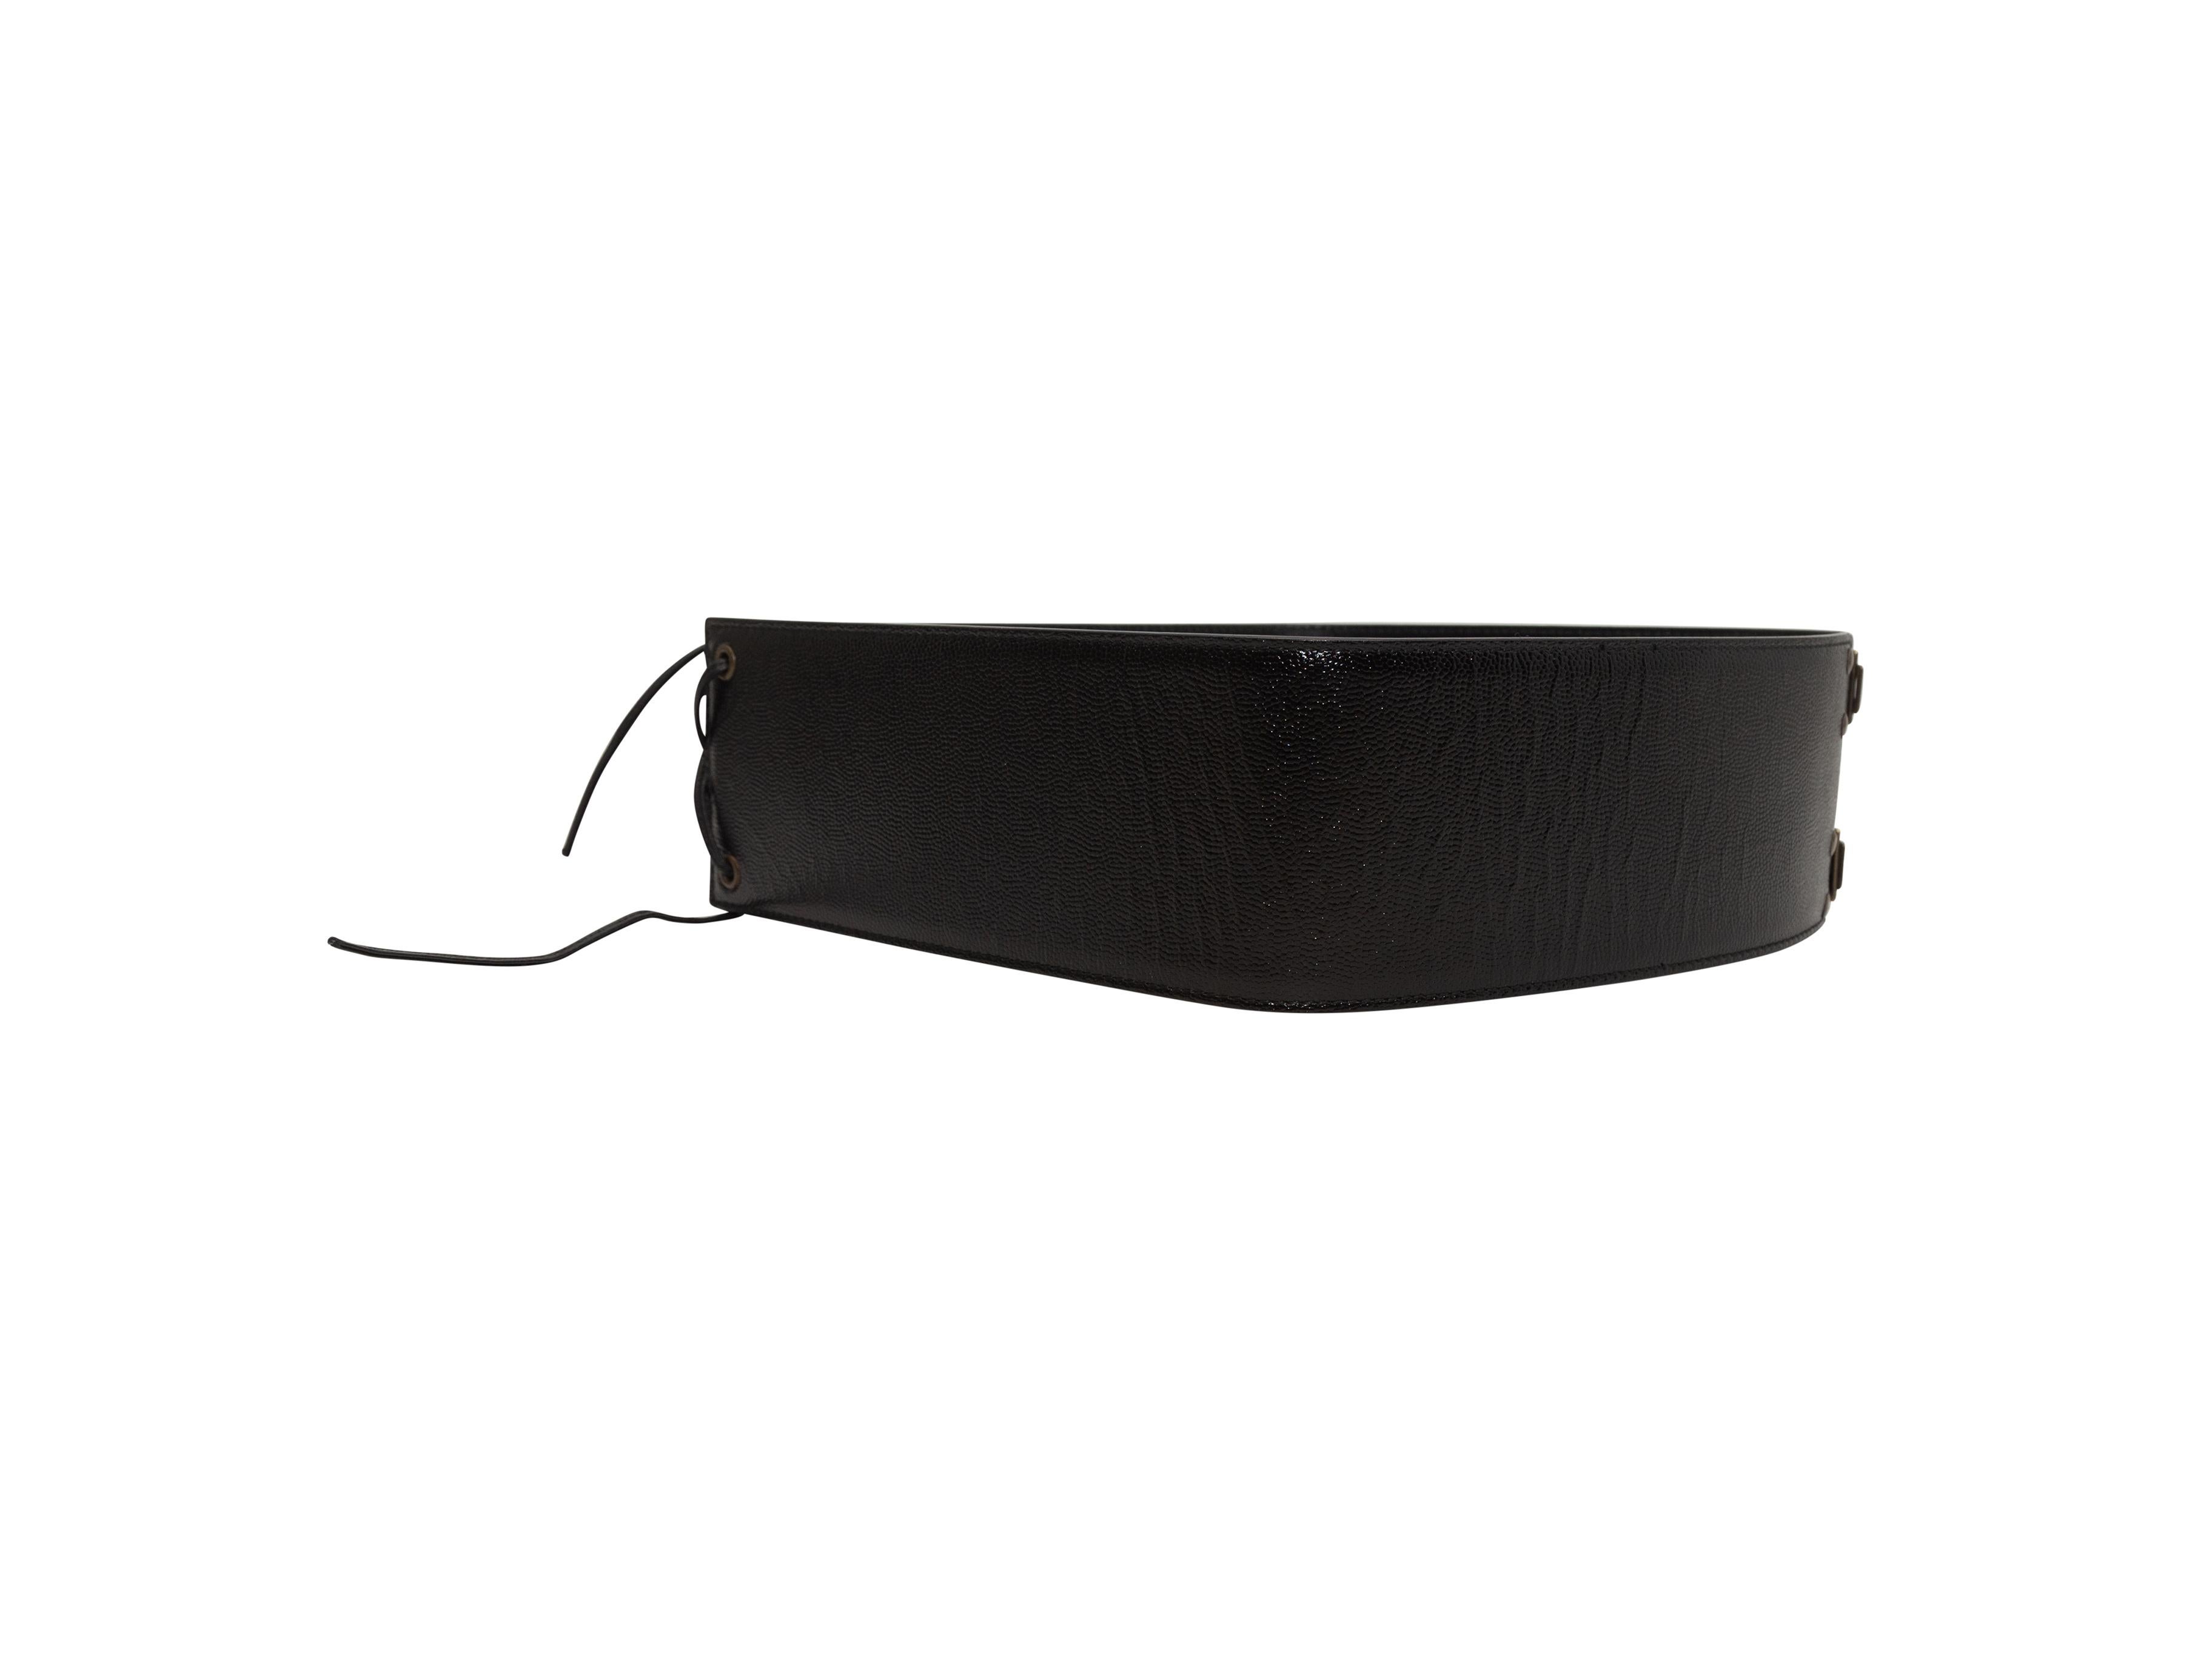 Product details: Vintage black wide leather belt by Yves Saint Laurent. Lace-up detailing at back. Brass hook-and-eye closures at front. 3.25